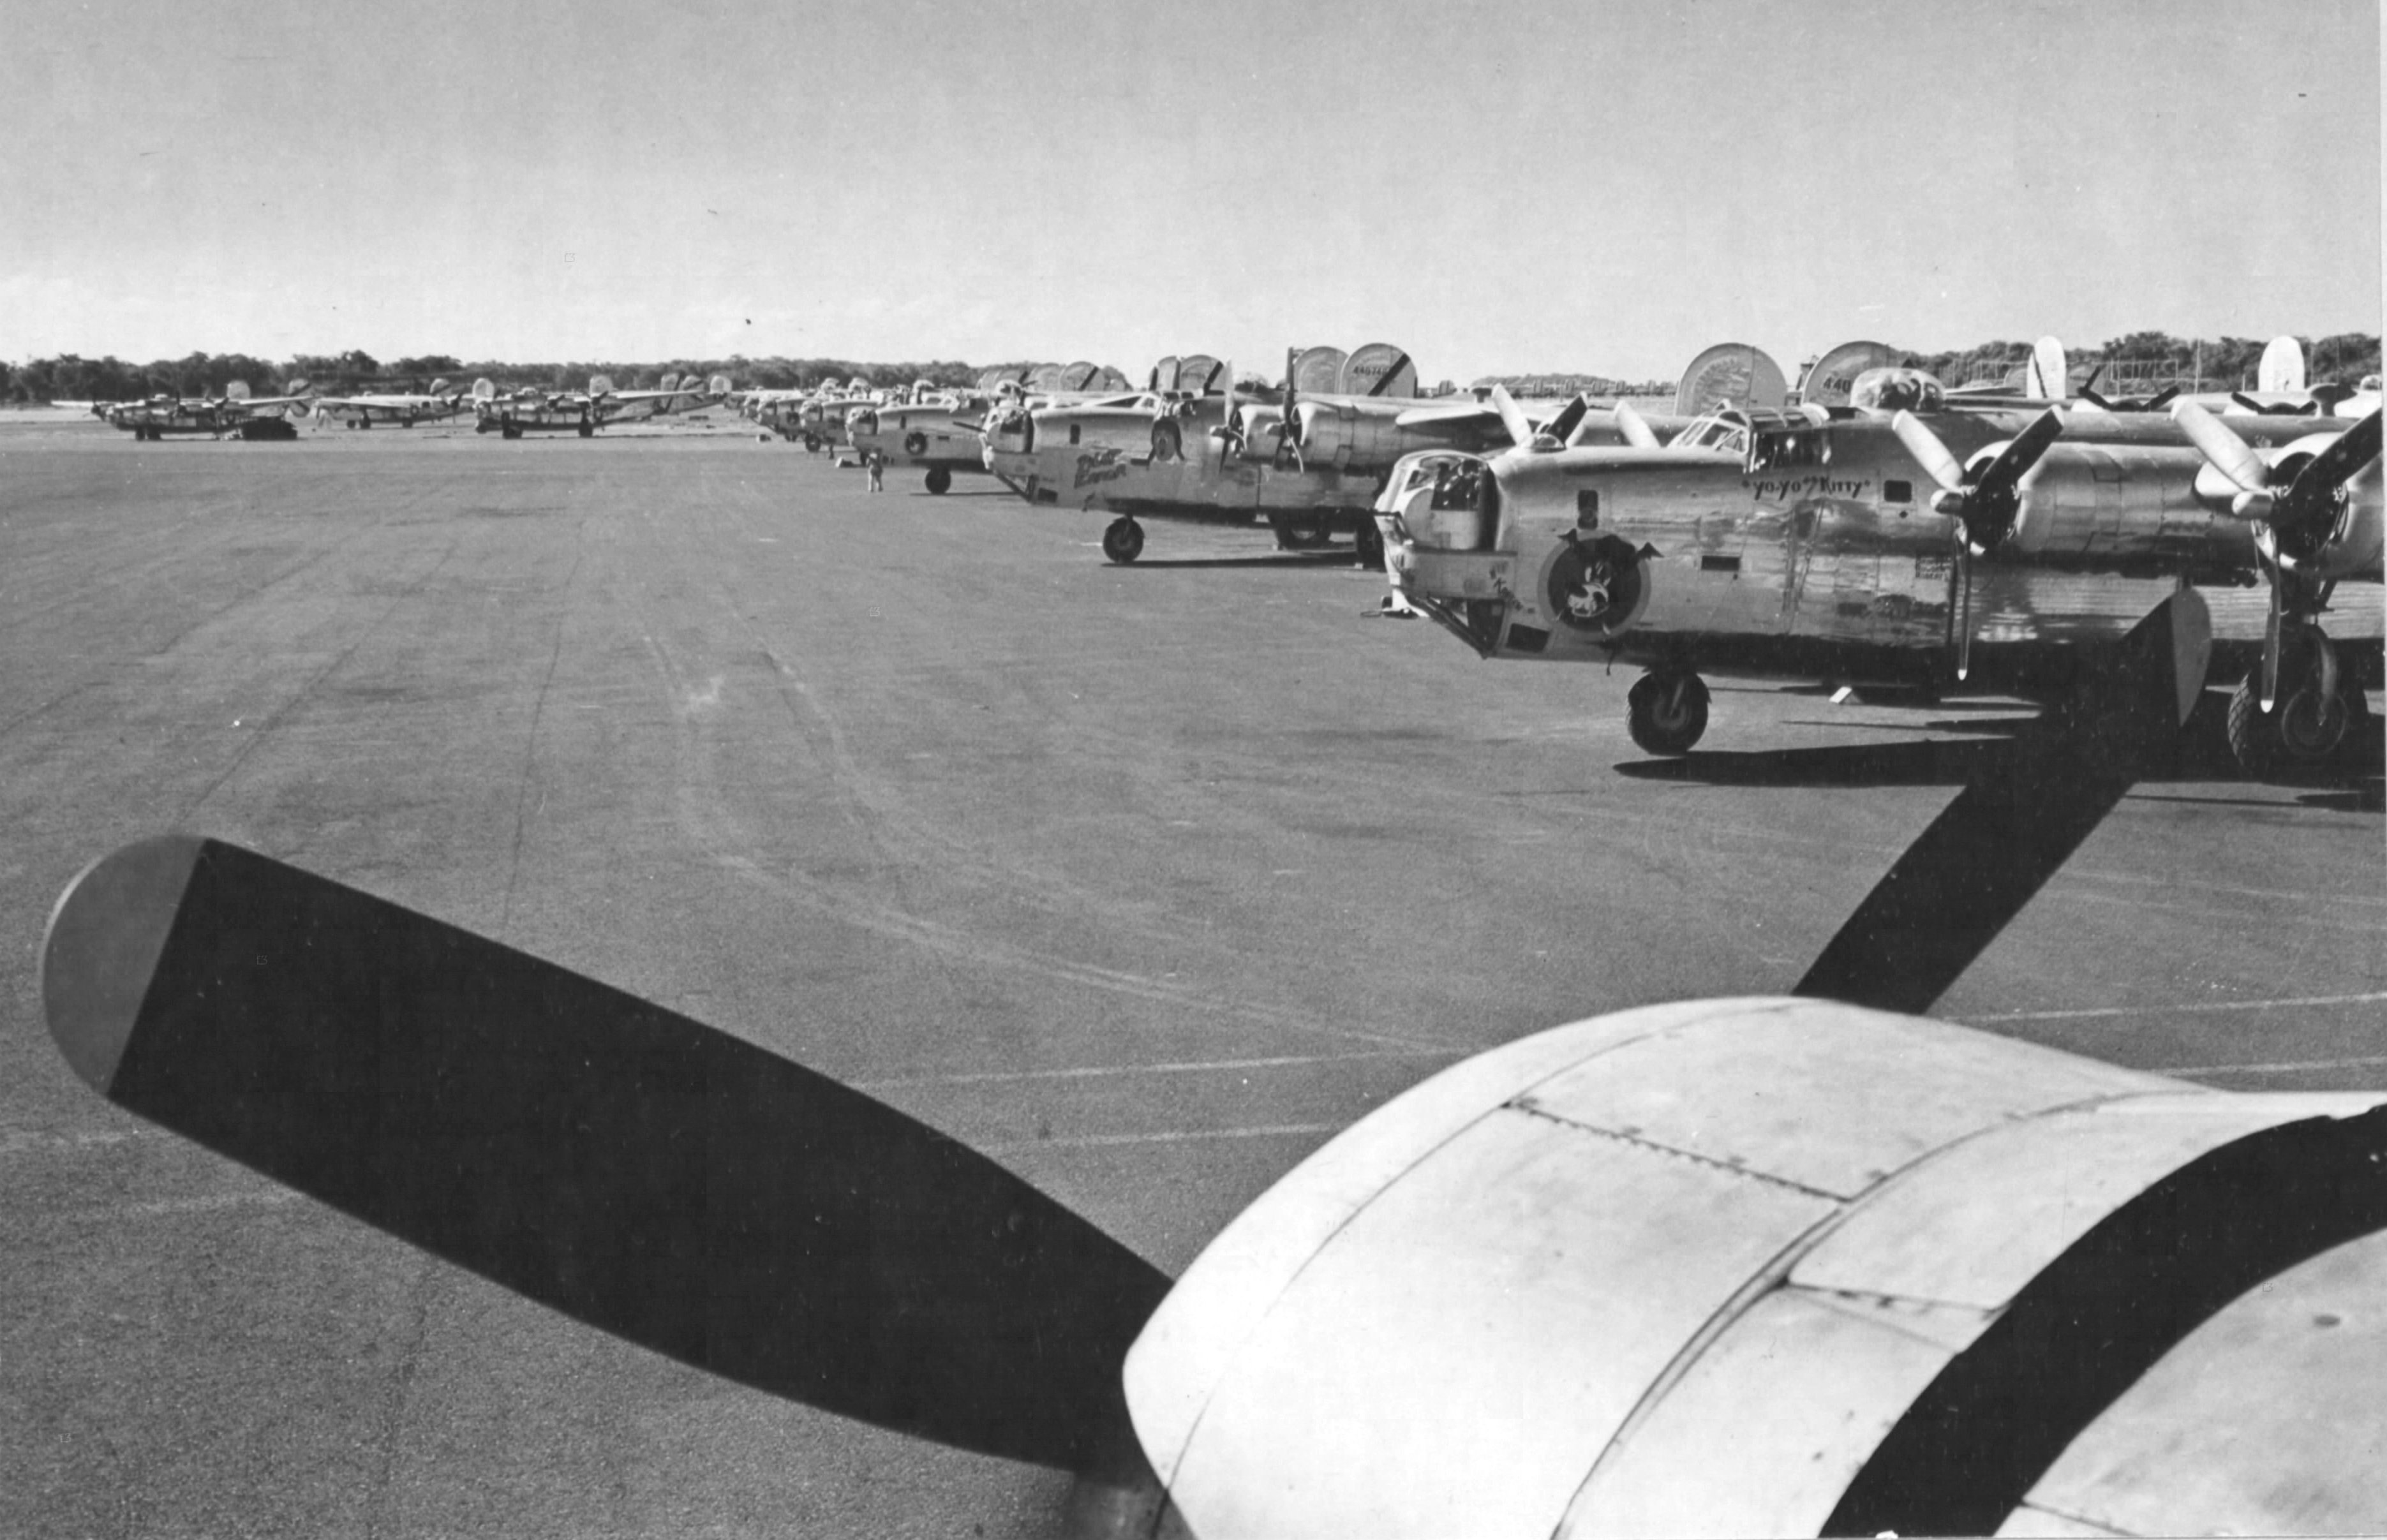 B-24 Liberator bombers of the 494th Bomb Group lined up at Barking Sands Airstrip, Kauai, Hawaii, 10 Oct 1943 just before their move to the Caroline Islands.